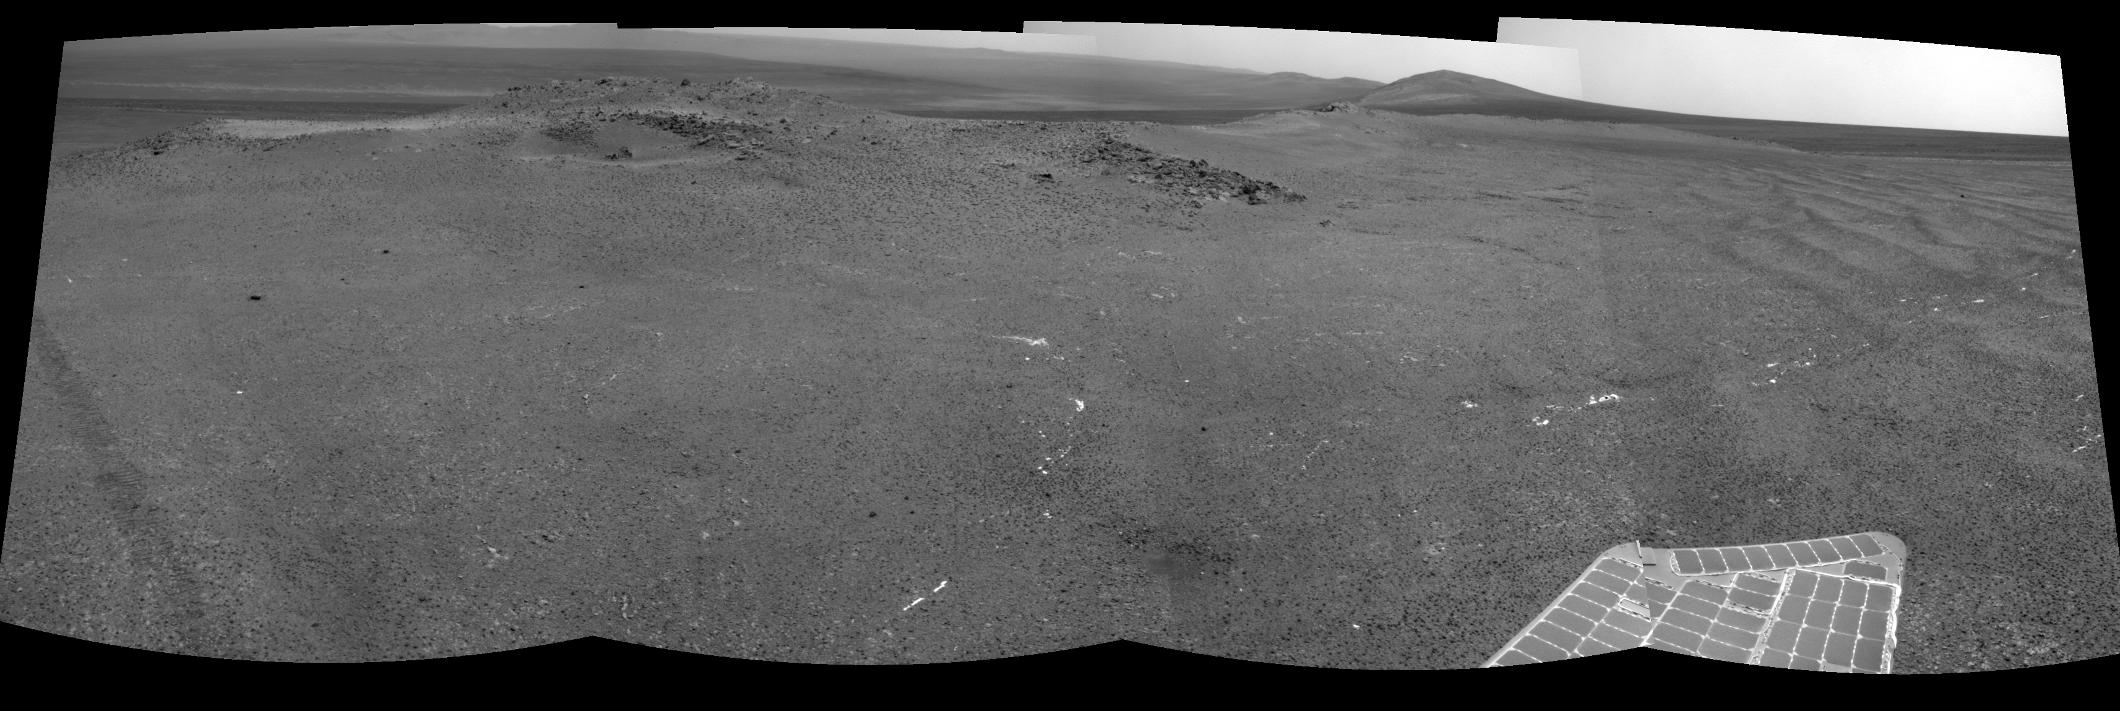 NASA's Mars Exploration Rover Opportunity used its navigation camera to record this view of a rise called "Nobbys Head" during a stop on a multi-week southward drive between two raised segments of the west rim of Endeavour Crater.